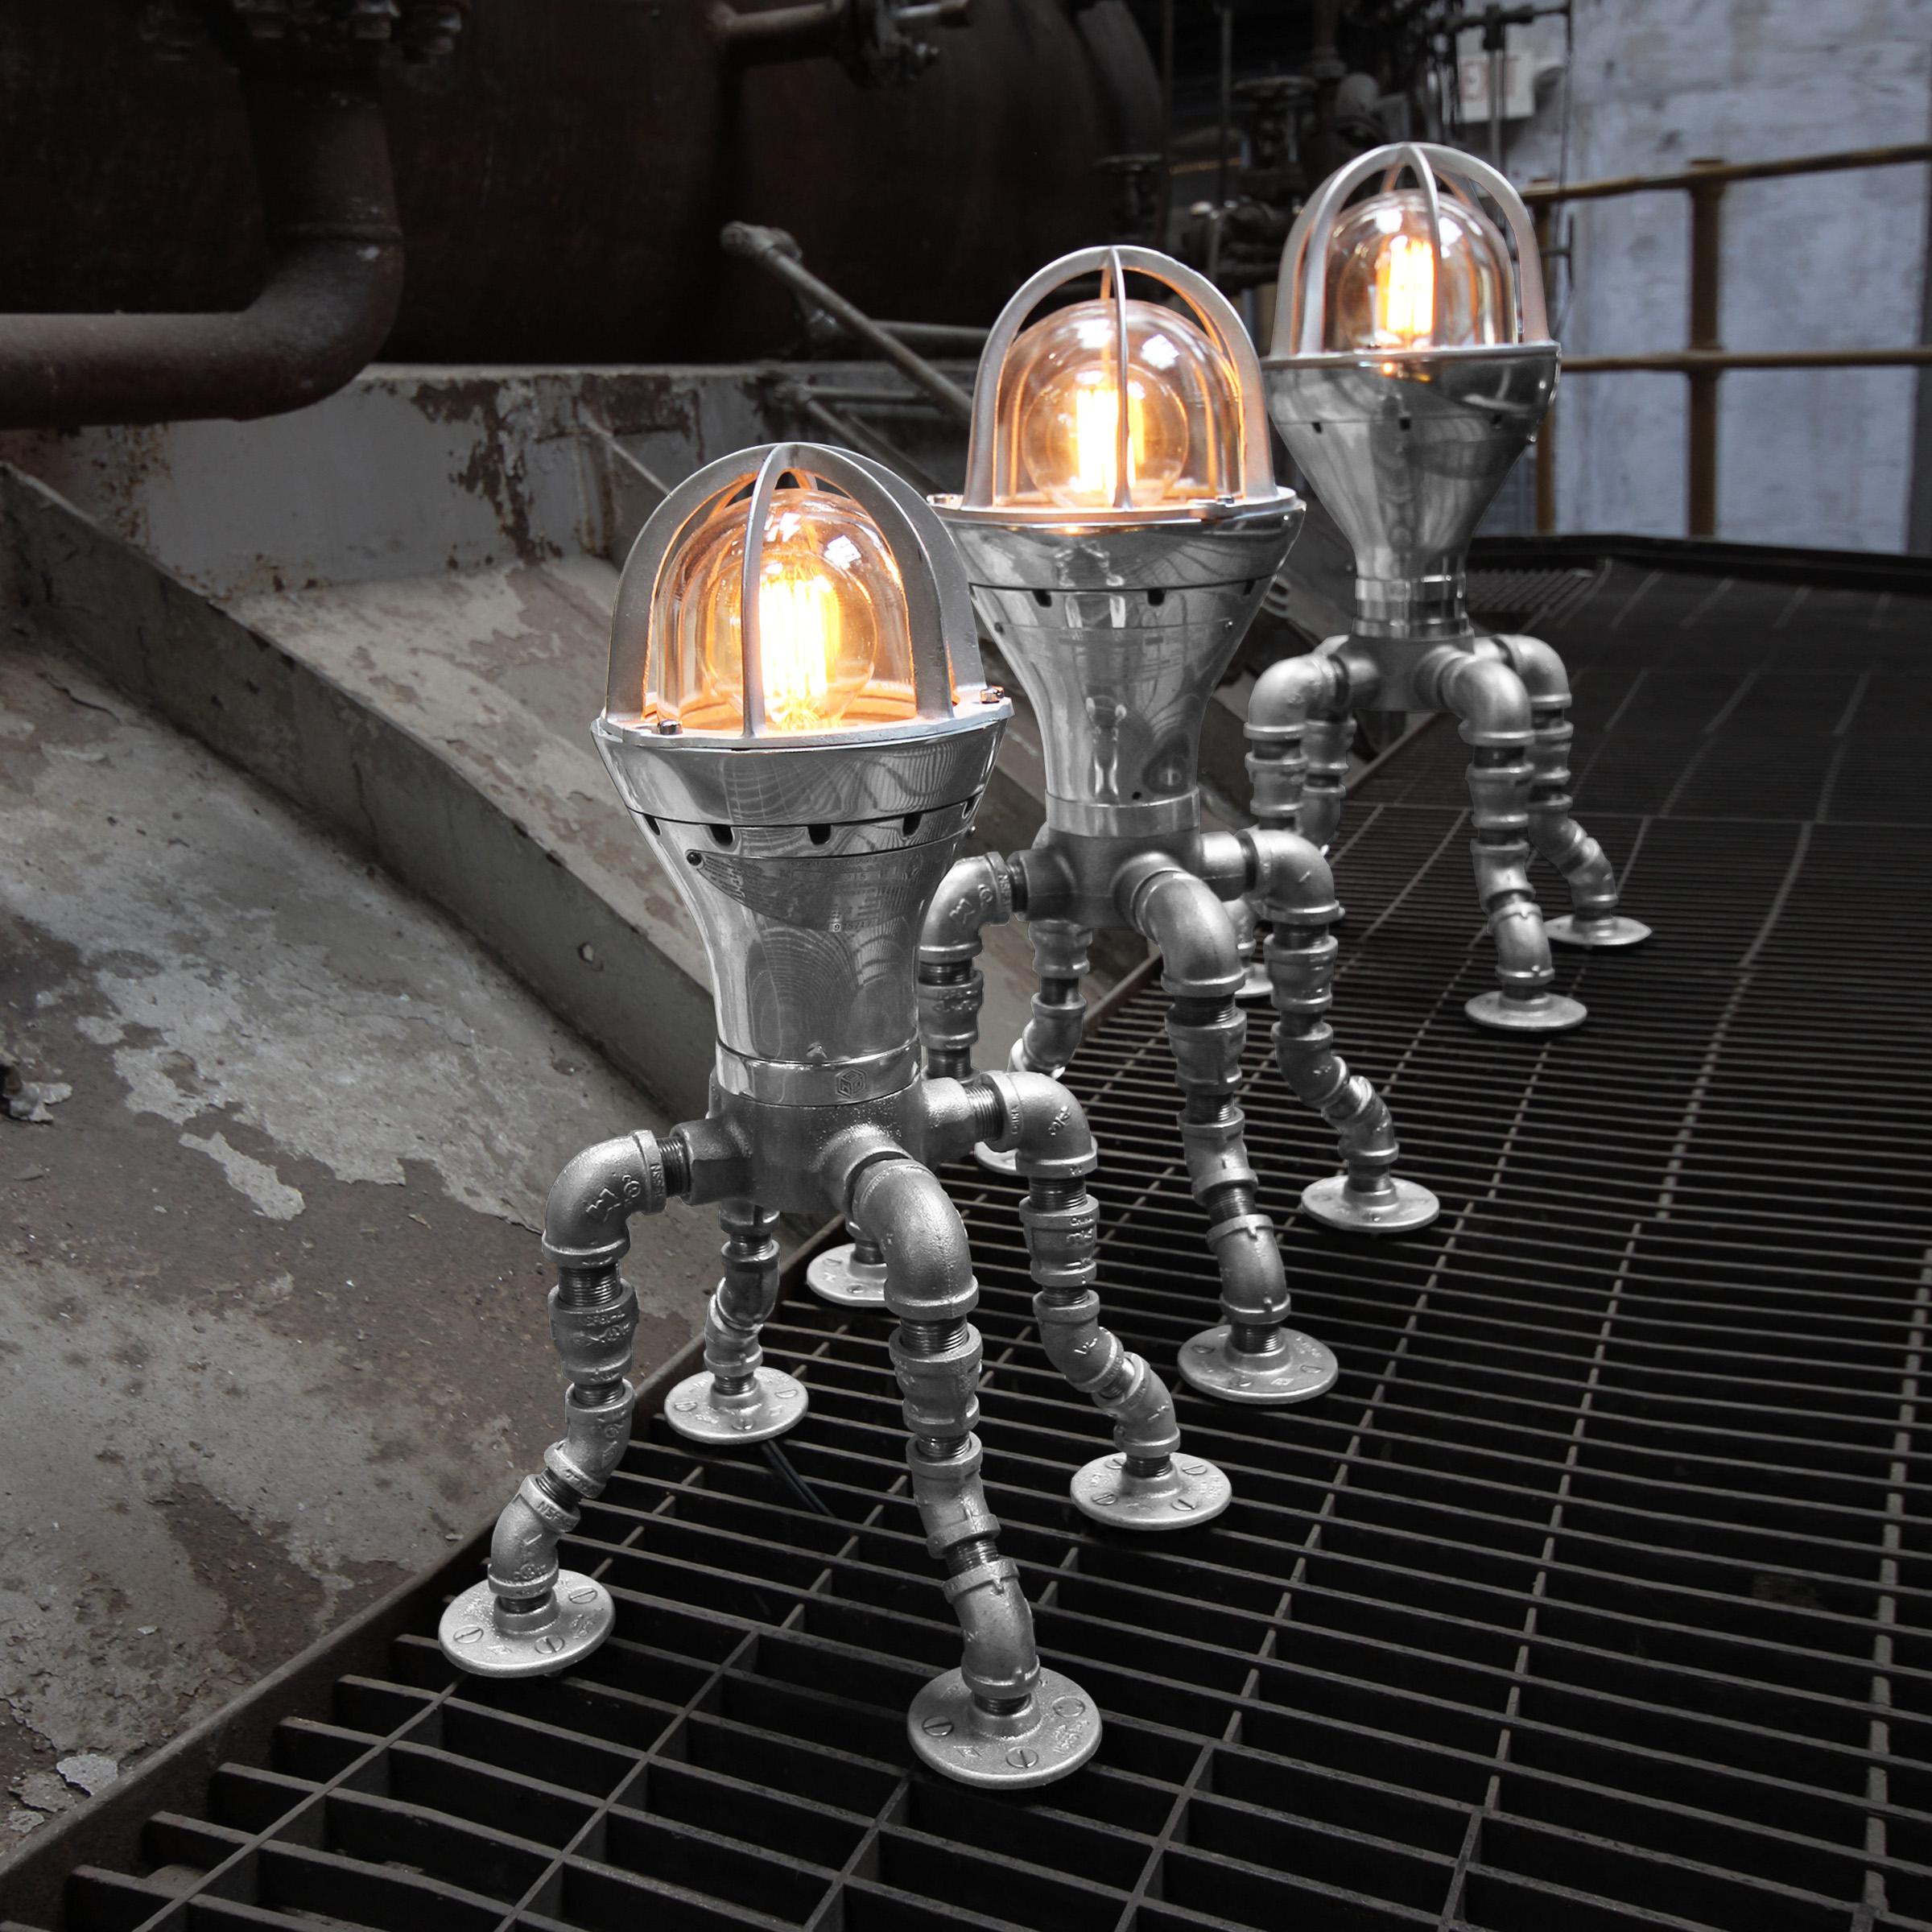 Contemporary Modern Industrial Lamp Set - Industrial Decor - Crouse Hinds Industrial Light For Sale